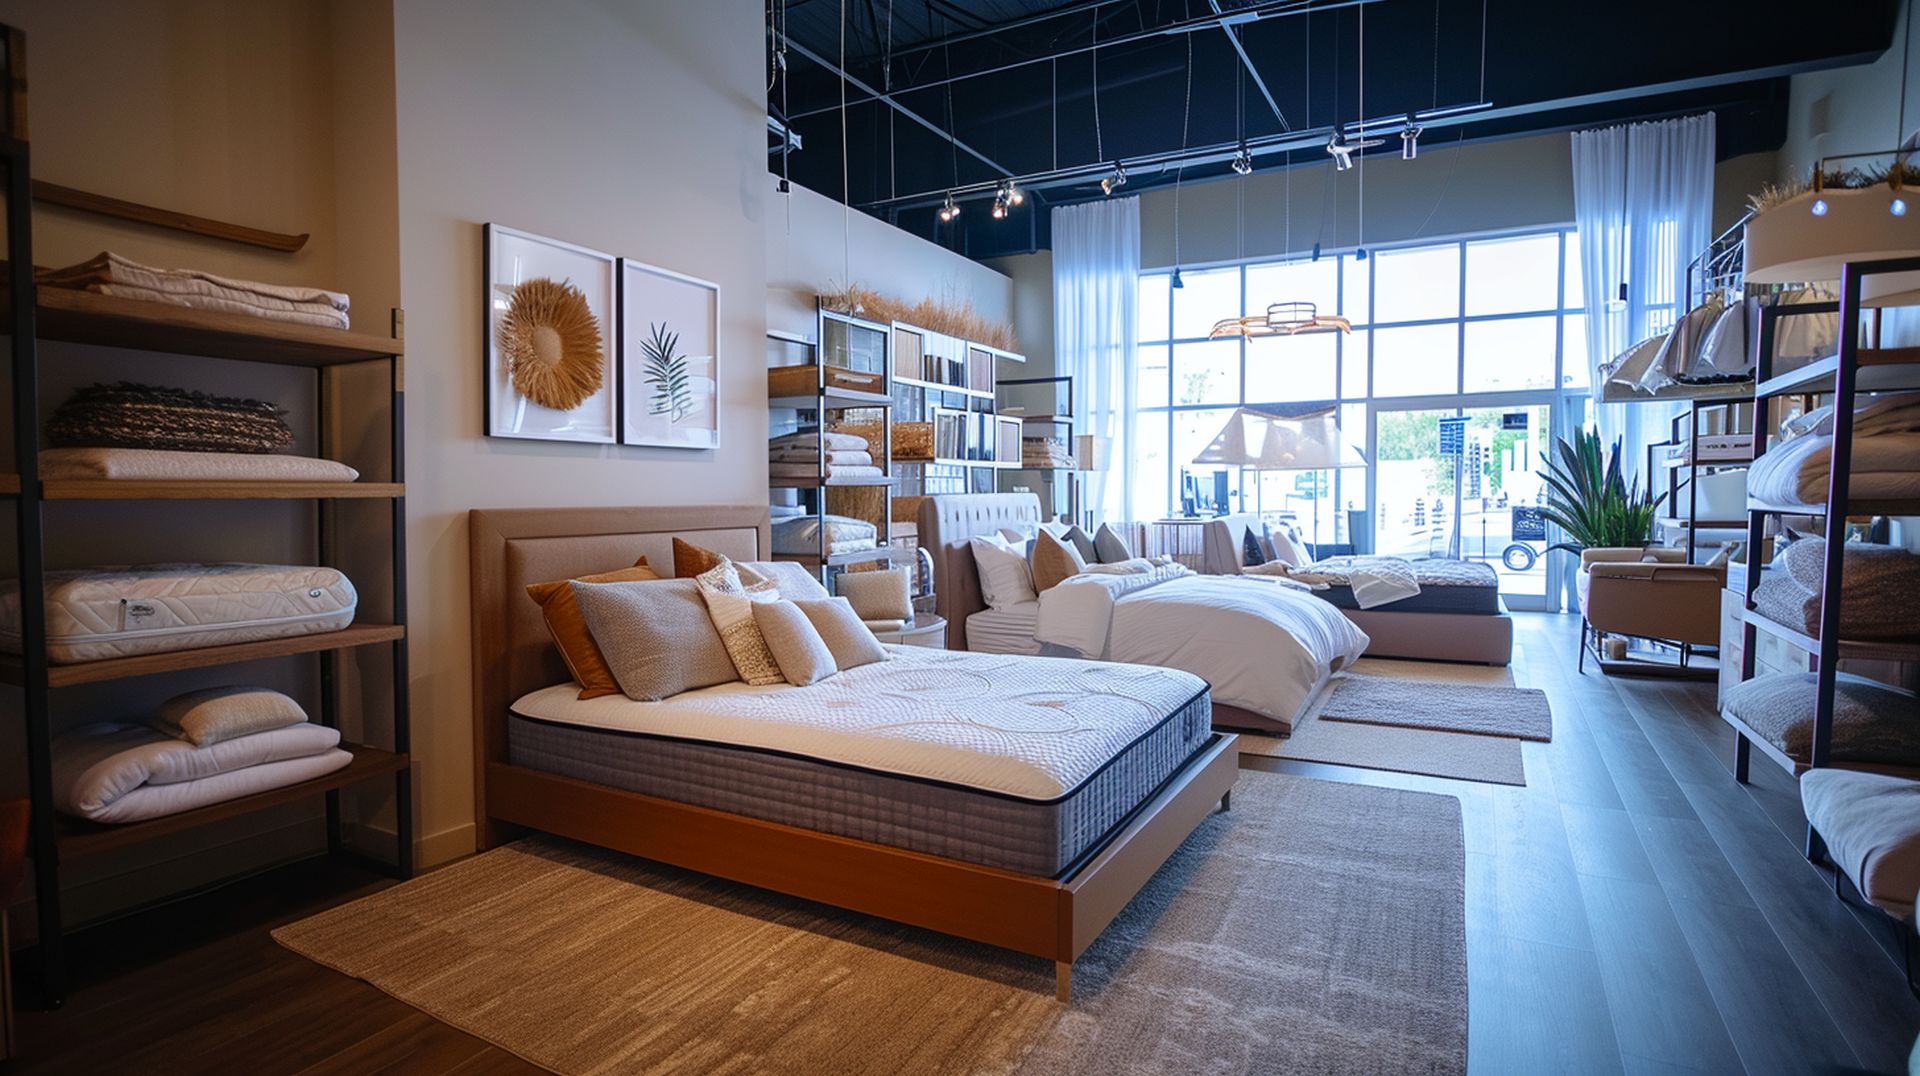 Local Quincy mattress stores have the best prices, sales, and deals if you're looking for a new mattress in Quincy